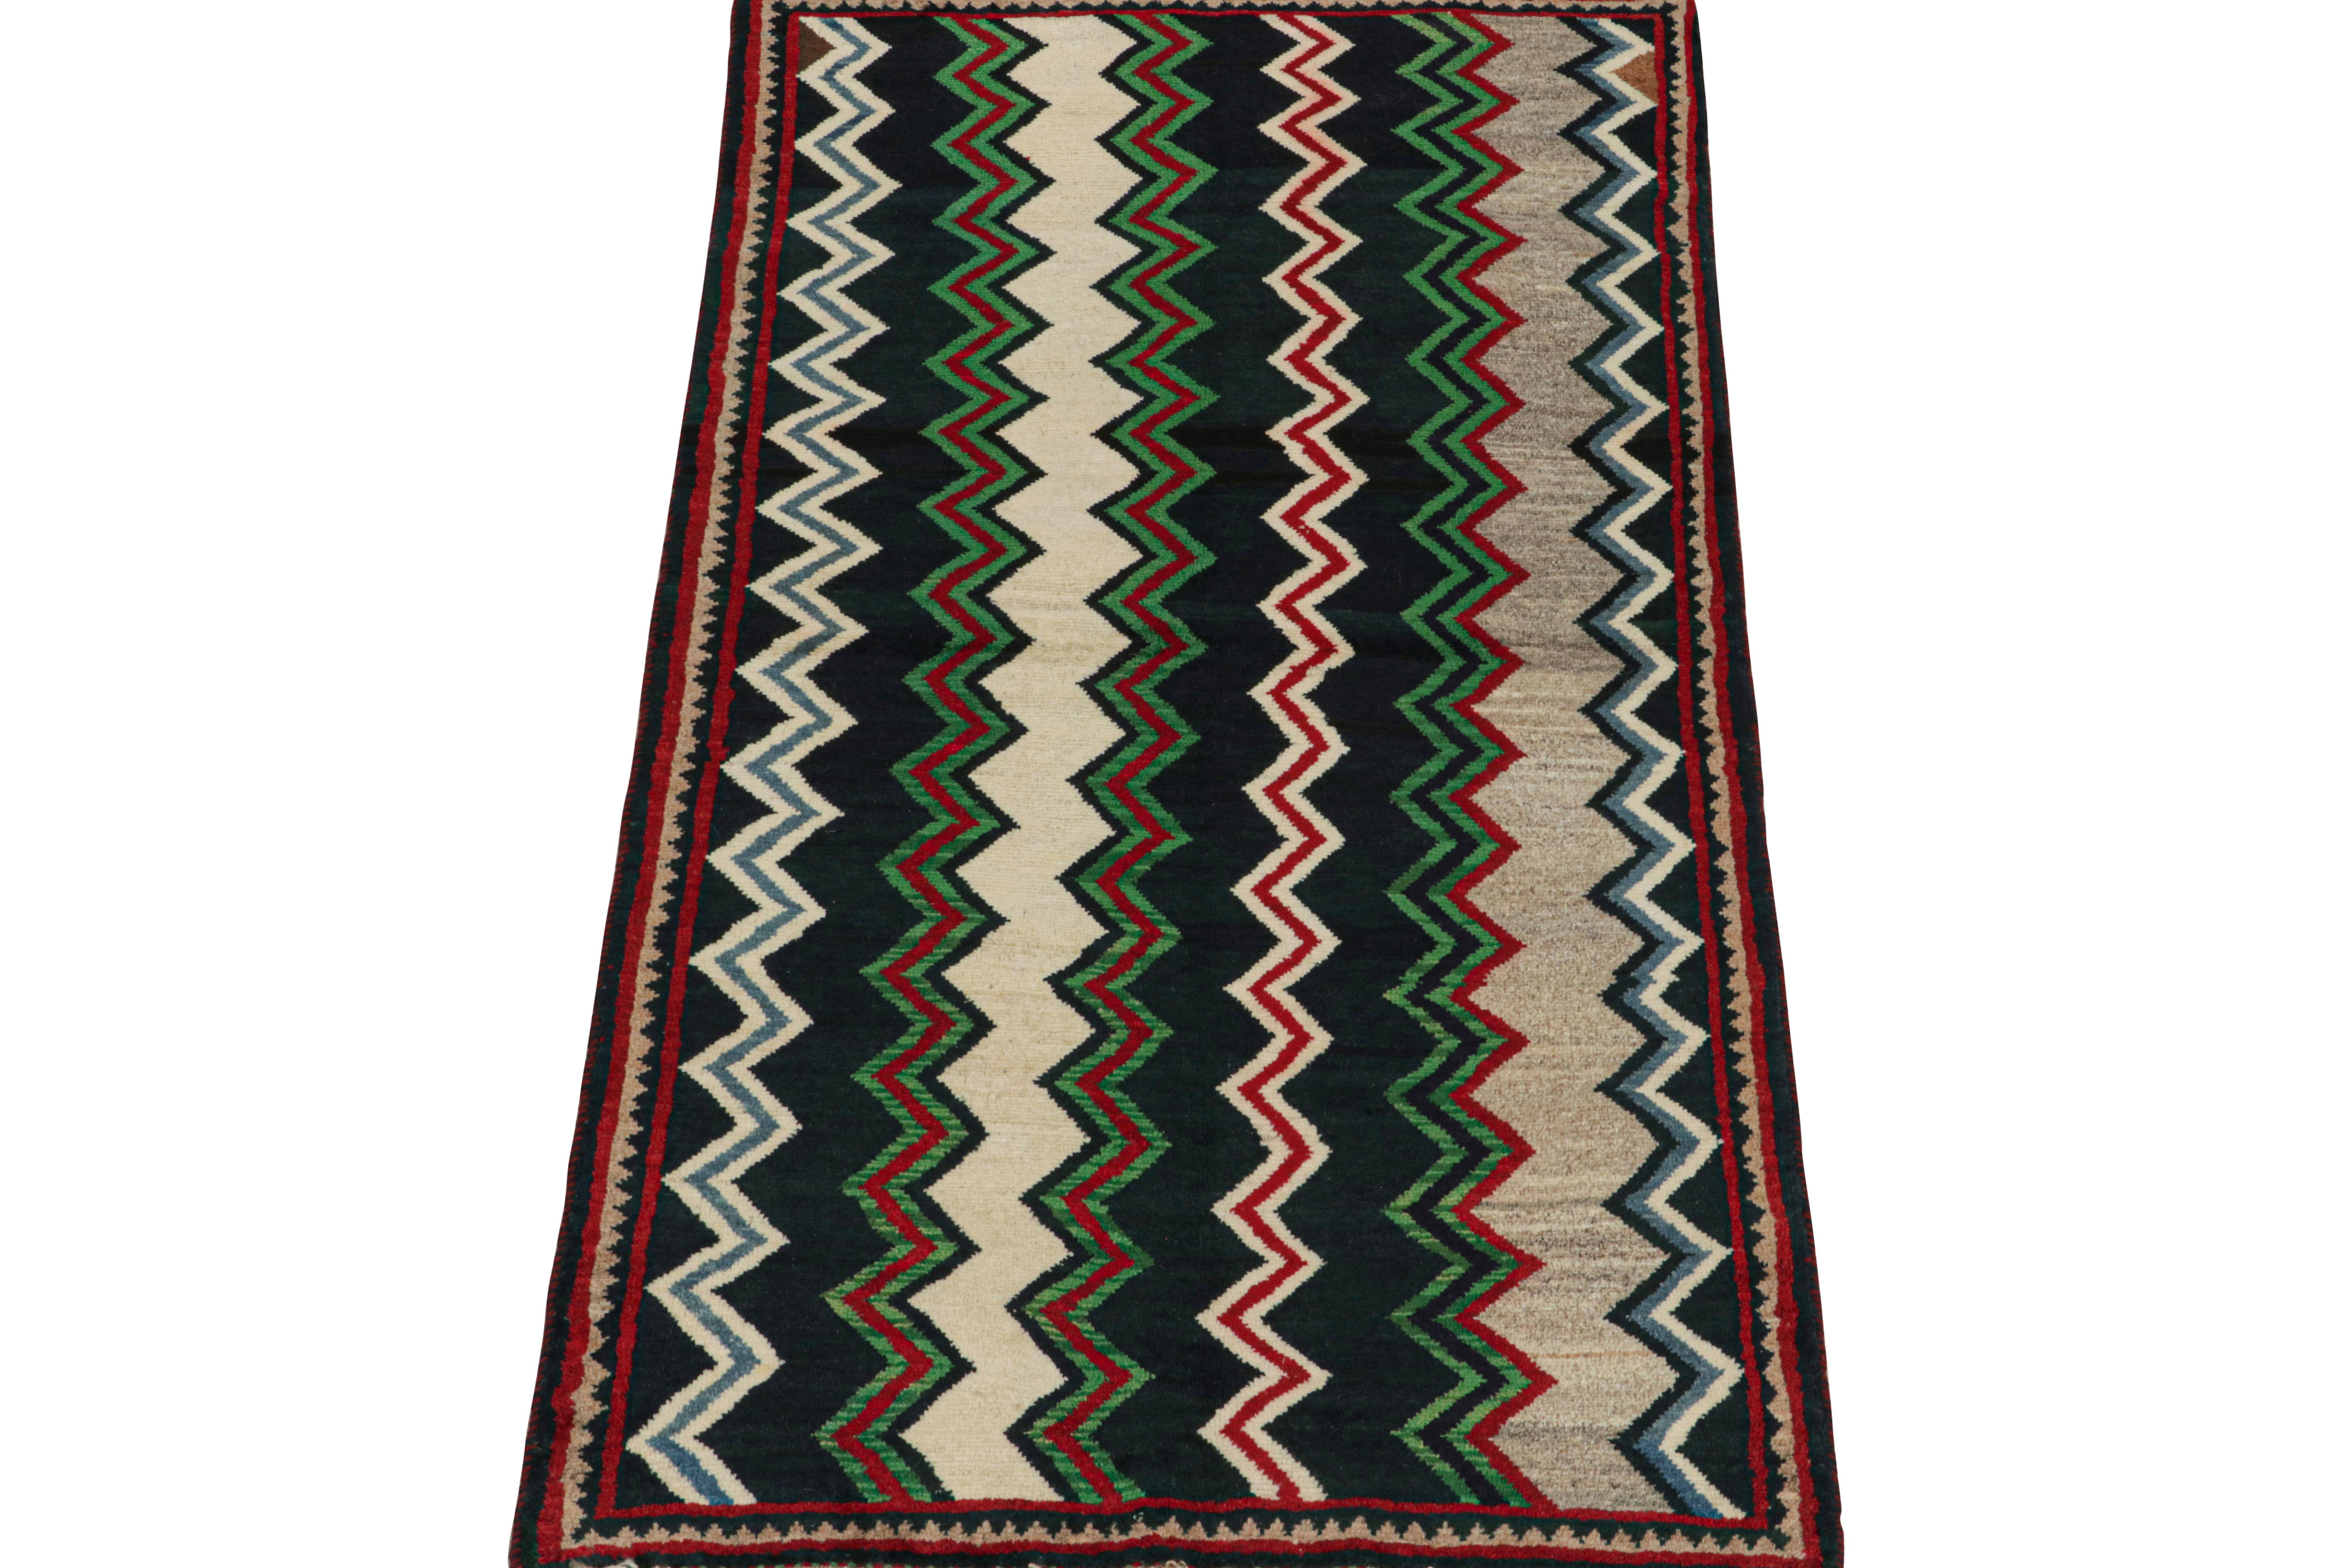 This vintage 3x6 Persian runner is a Gabbeh rug that originates from the Qashqai tribe—hand-knotted in wool circa 1950-1960.

Its geometric pattern is a repeat of chevrons in navy blue, green, red, and beige tones with sharp lines. 
Connoisseurs